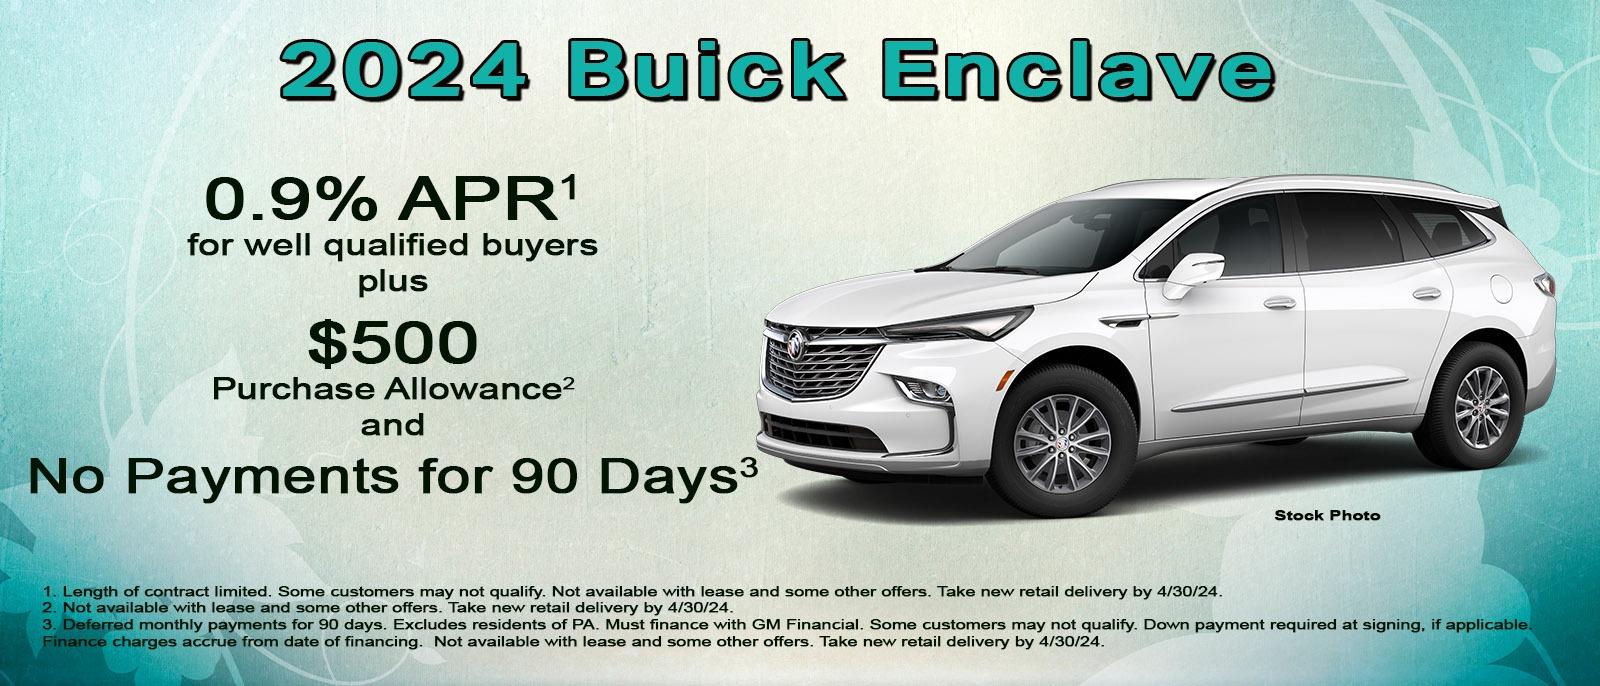 No payments on your new 2024 Buick Enclave